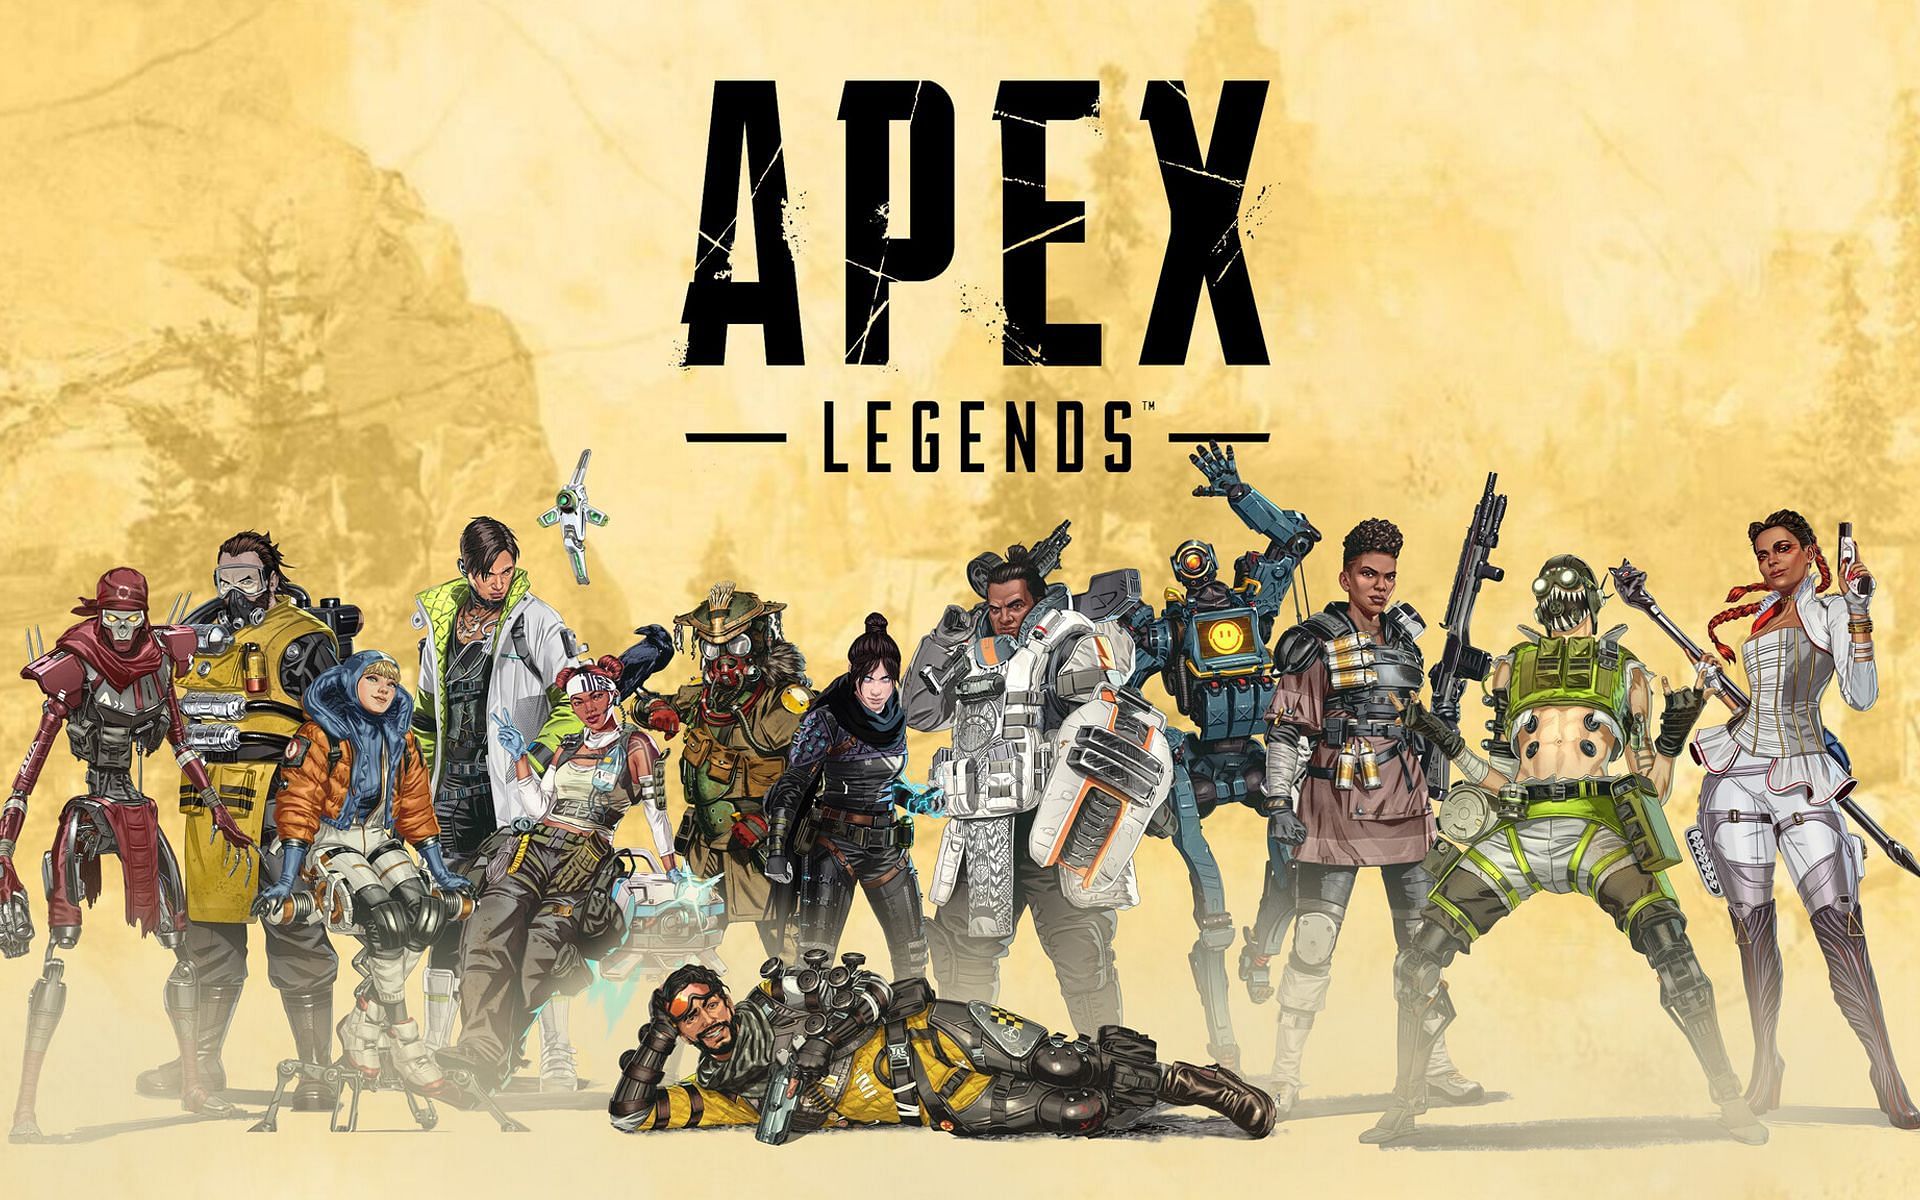 Apex Legends Crossprogression When will the feature arrive globally?